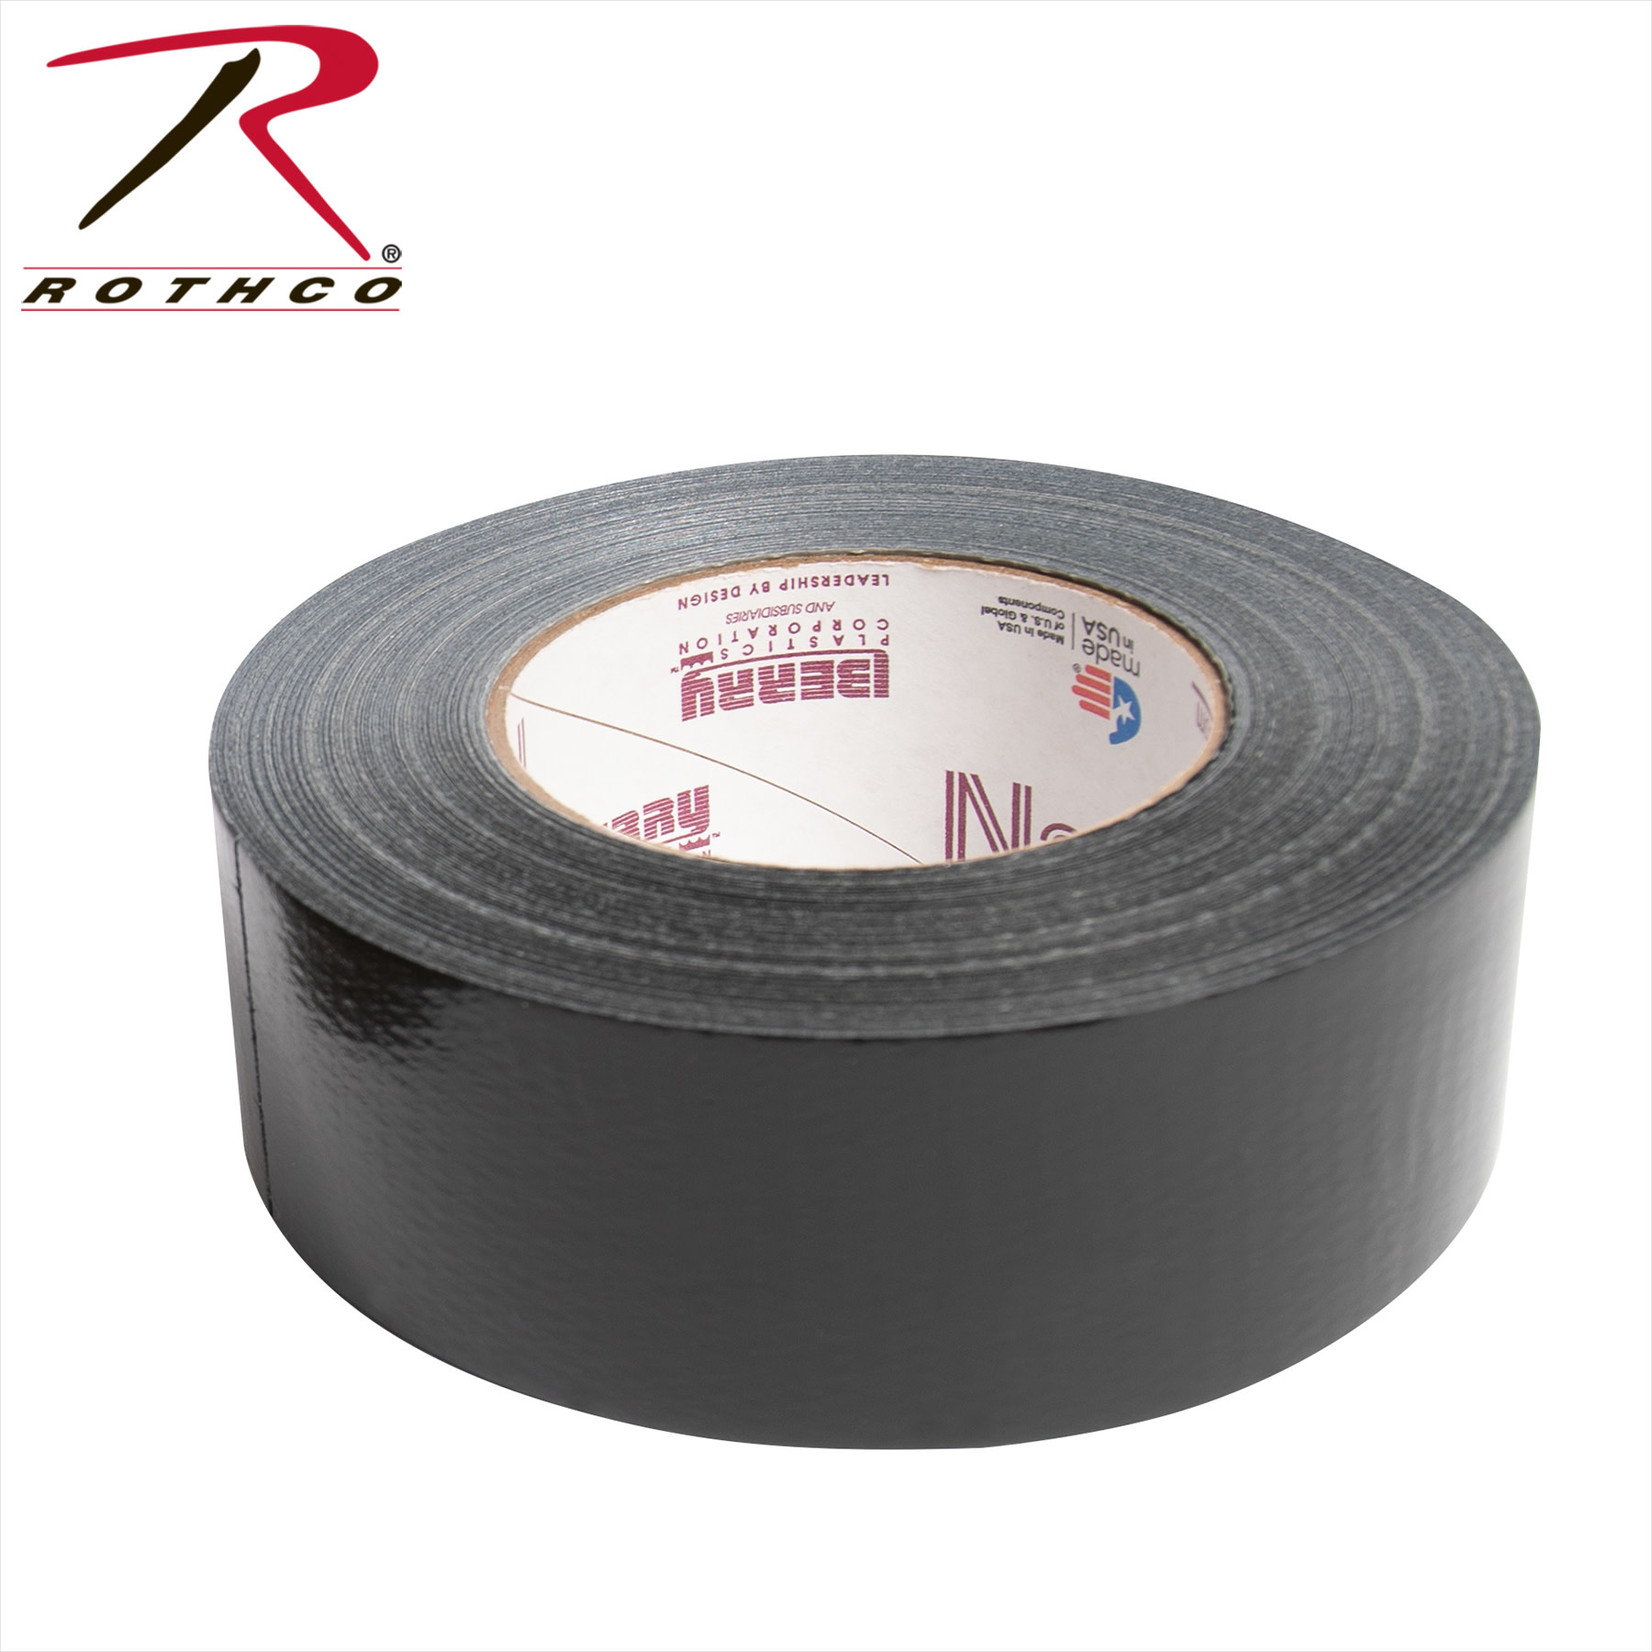 Nashua Tape Mile An Hour Military Duct Tape - 1.89" x 60.1yd